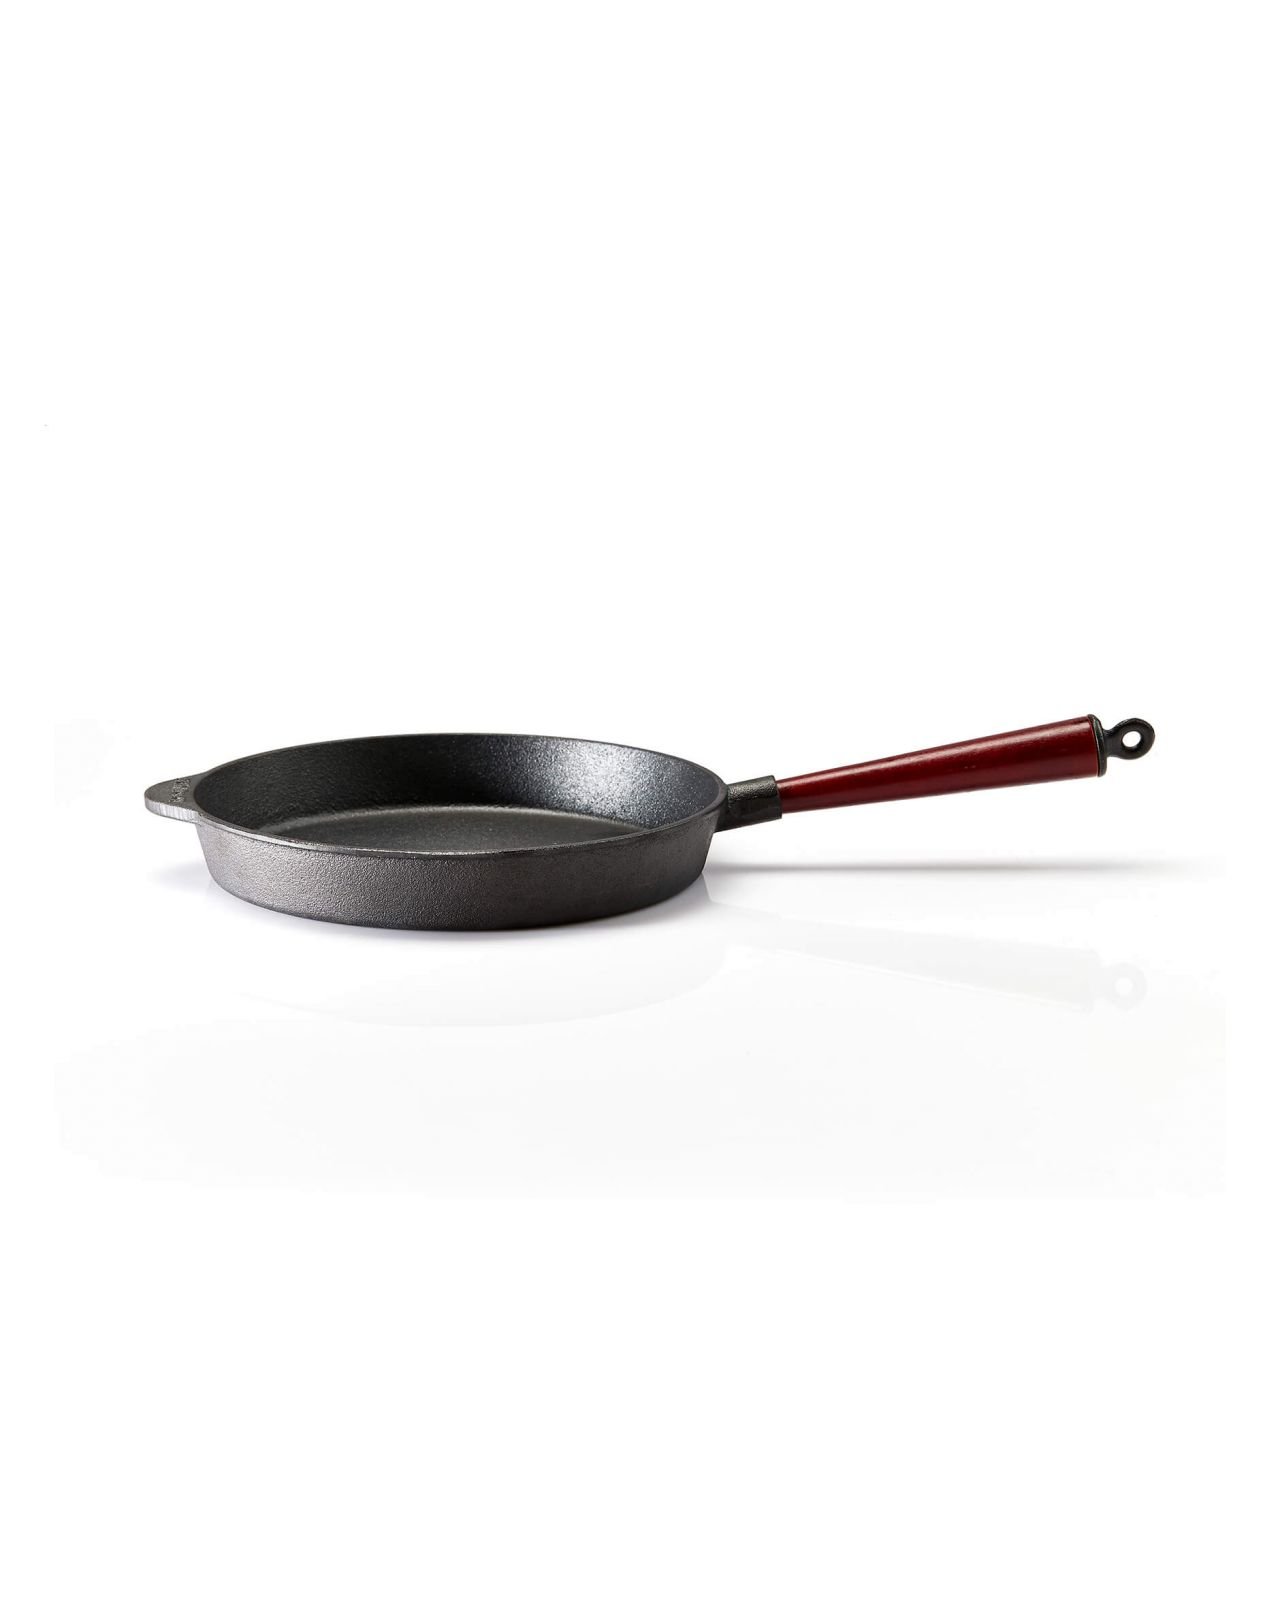 Leather & Wool Cast Iron Pan Handle